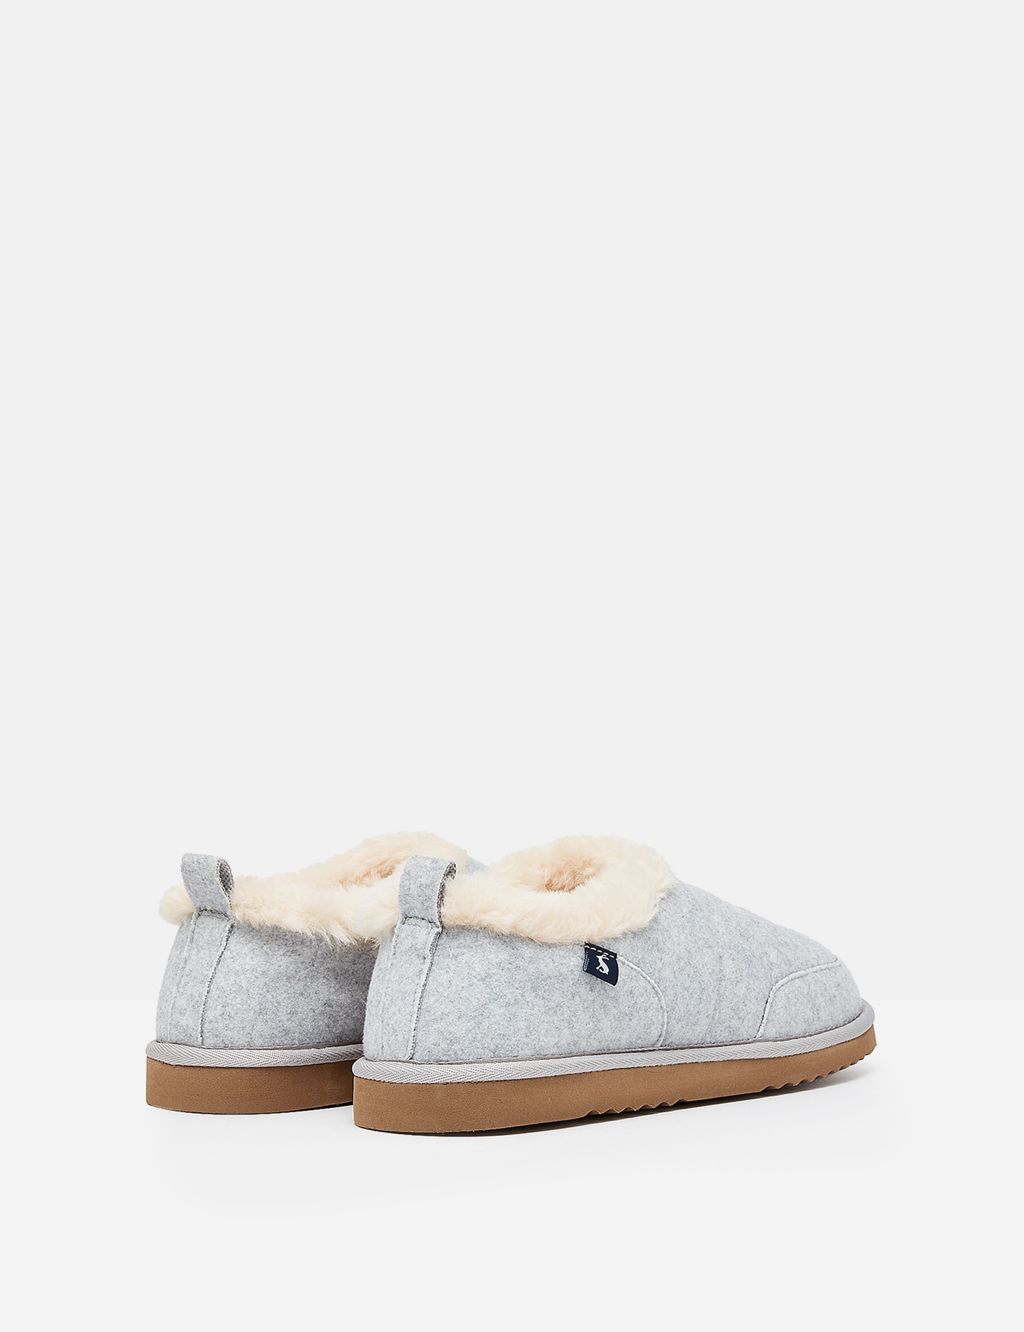 Faux Fur Lined Mule Slippers image 4